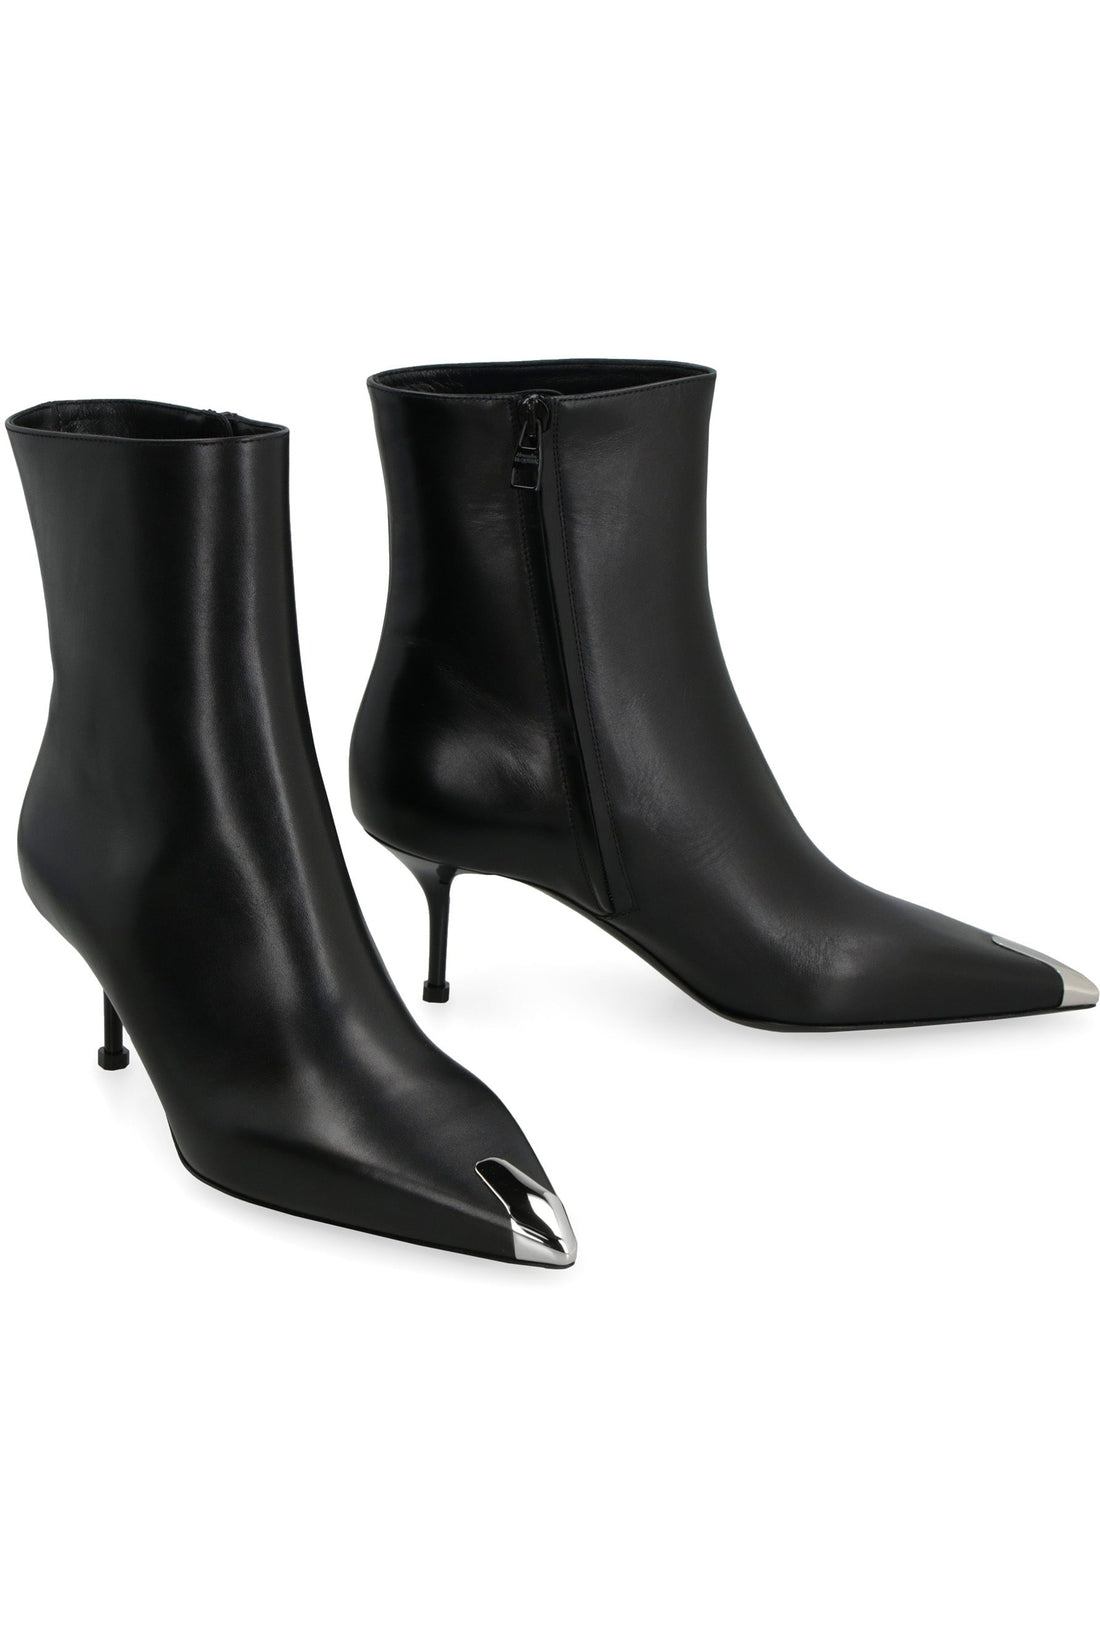 Alexander McQueen-OUTLET-SALE-Punk leather pointy-toe ankle boots-ARCHIVIST